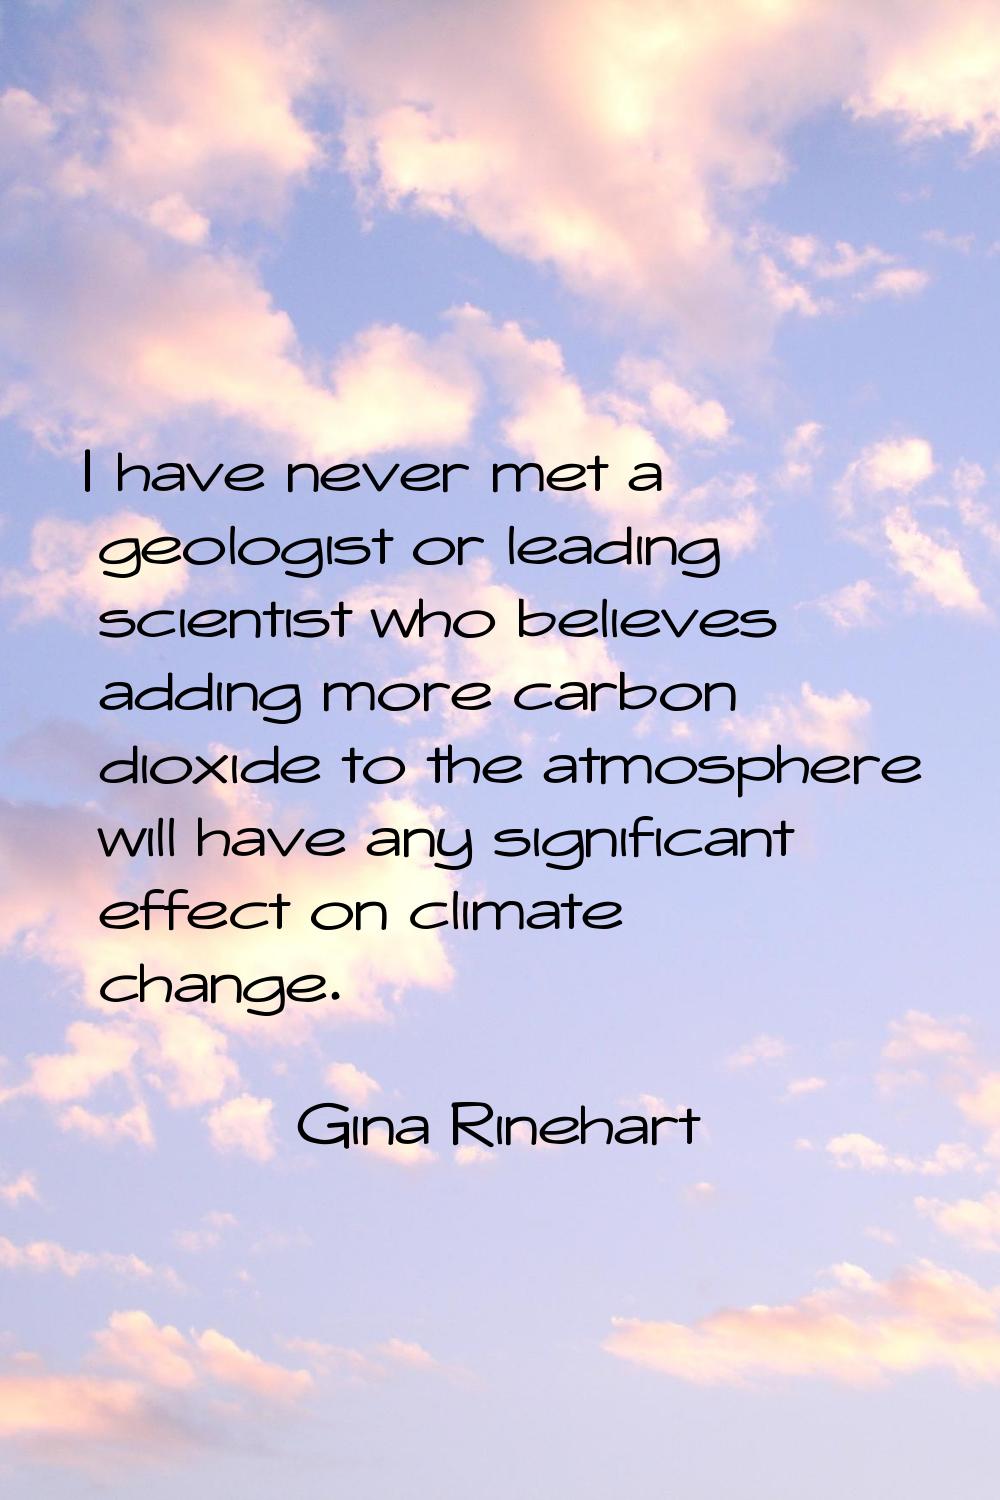 I have never met a geologist or leading scientist who believes adding more carbon dioxide to the at